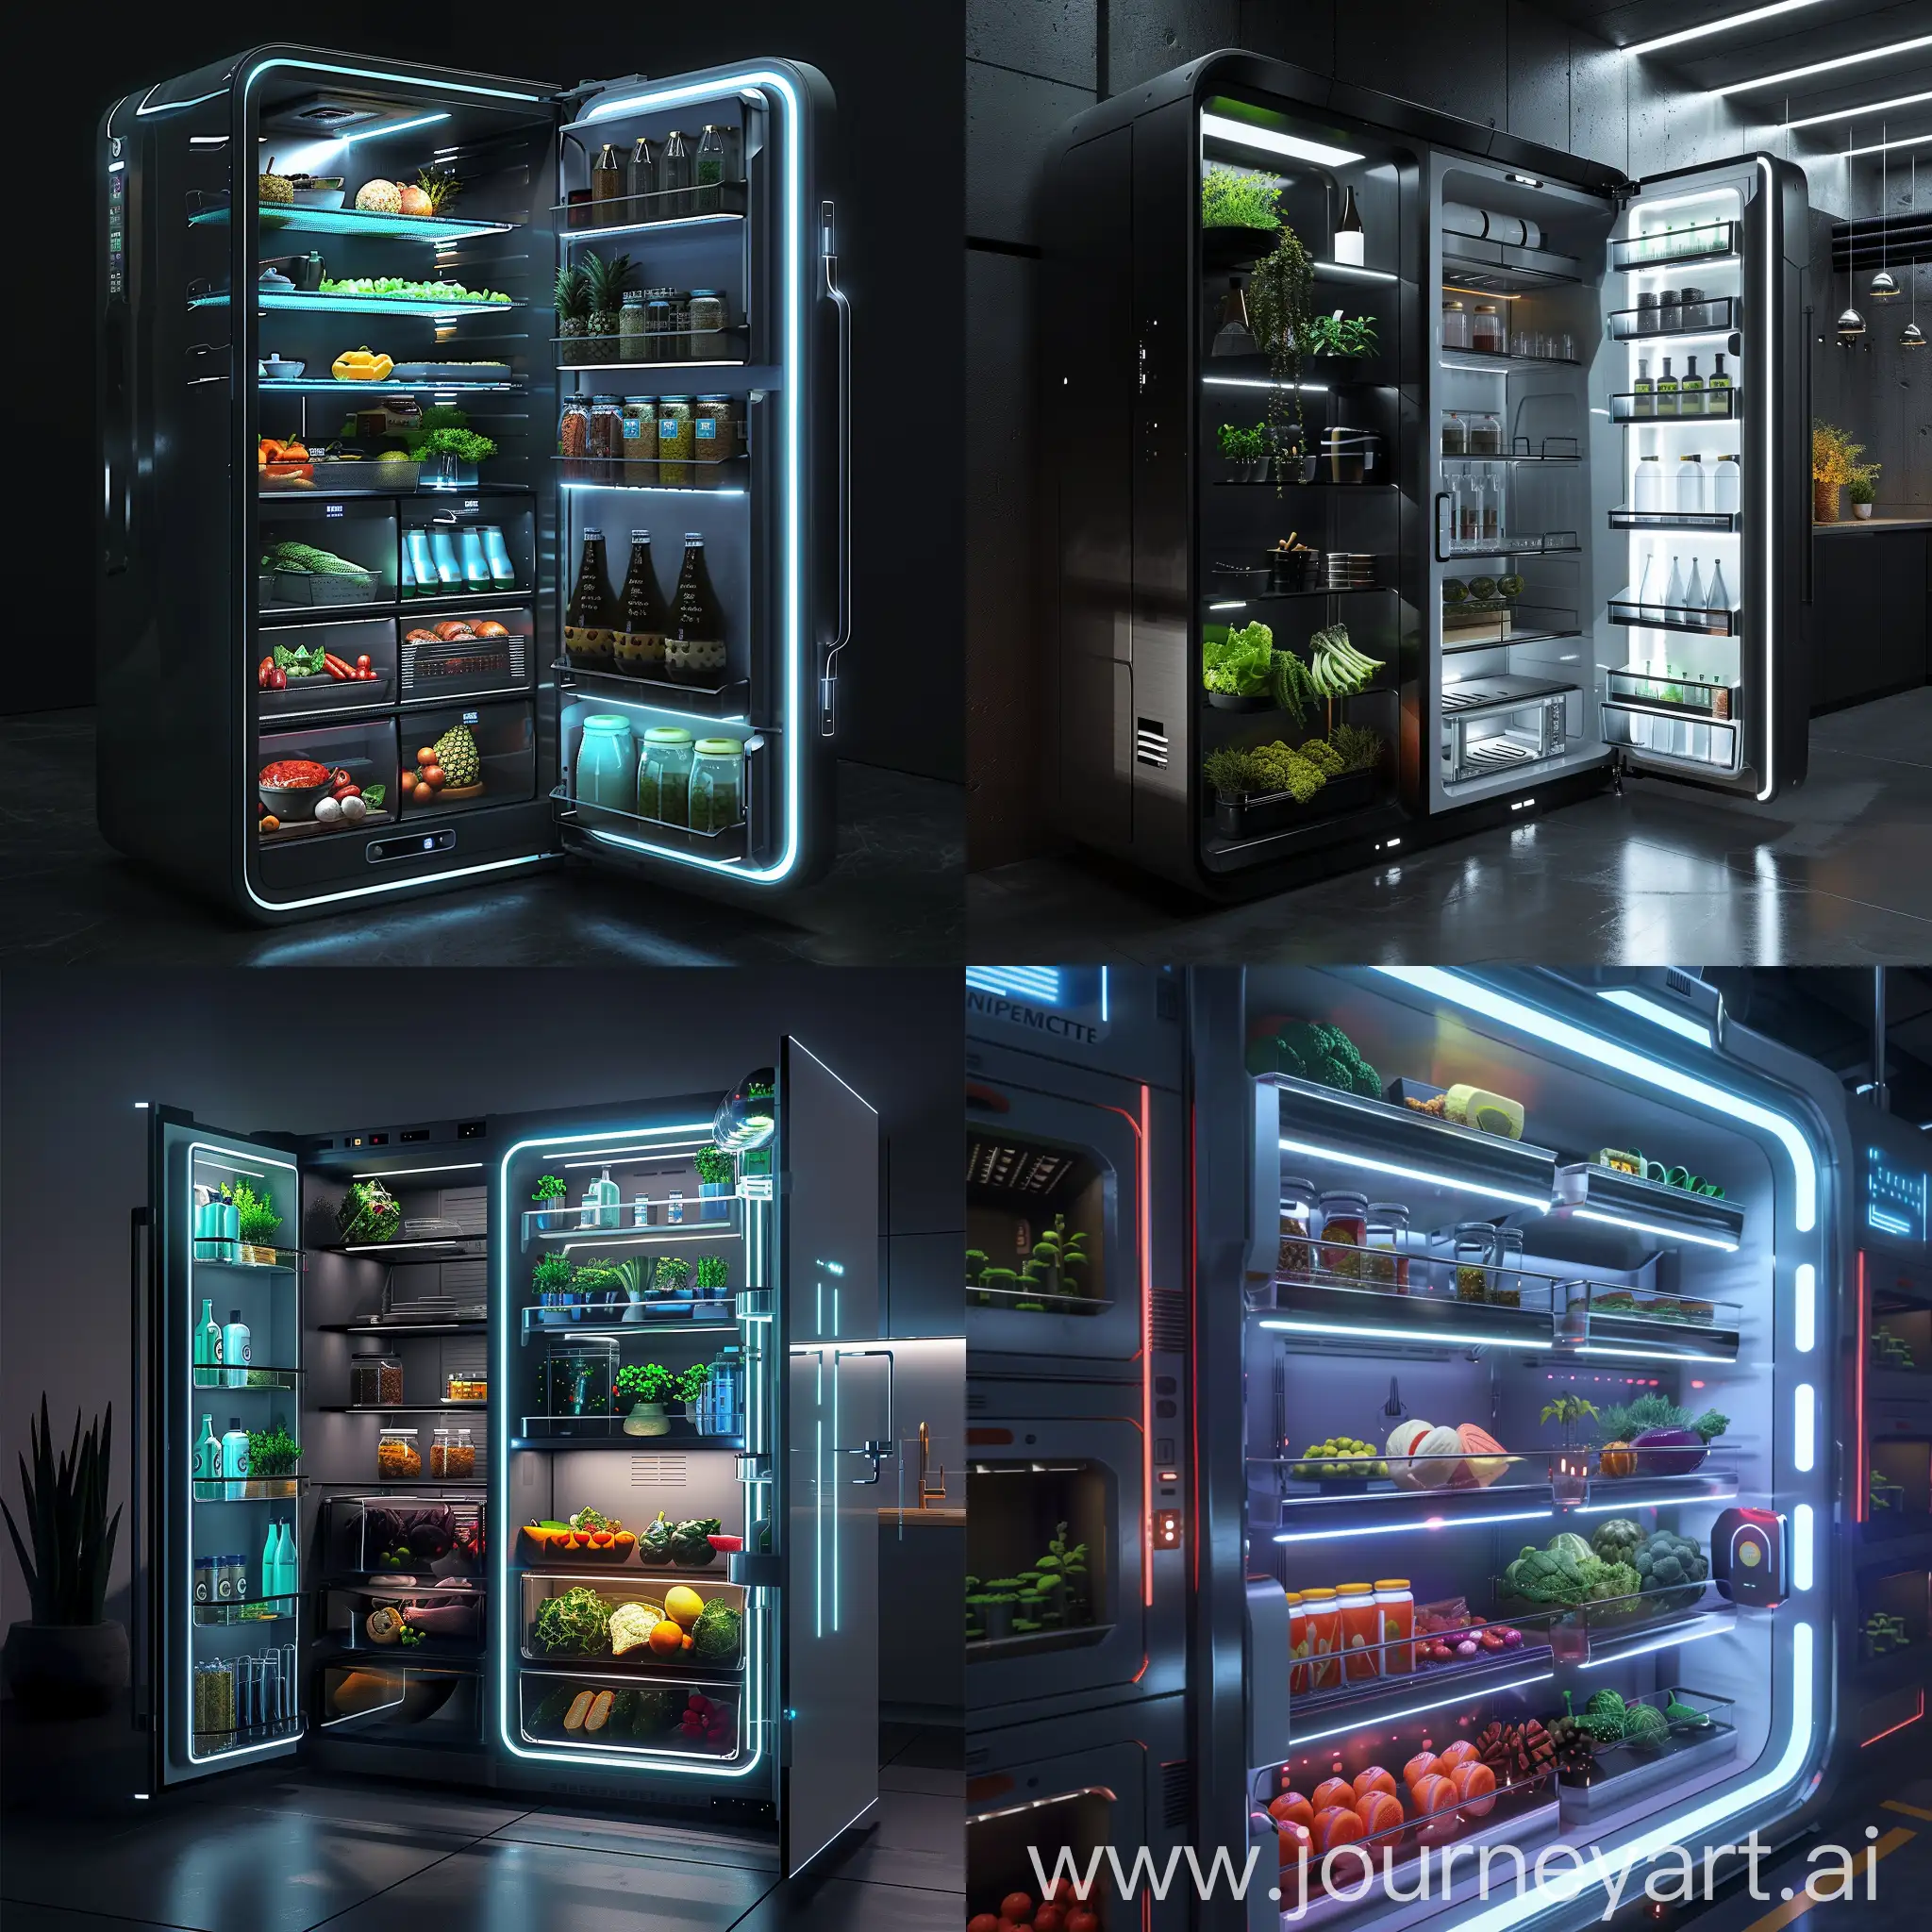 Futuristic fridge, AI-powered Inventory Management, Nanotech-coated Shelves, Quantum-inspired Optimization, Brain-Computer Interface (BCI) for Effortless Control, Augmented Reality Recipe Overlay, Robotic Arms for Easy Access, Internet of Things (IoT) Integration, Blockchain-powered Food Tracking, Genetically Modified Food Preservation, Personalized Nutrition with 3D Printing, Seamless Integration with the Kitchen, AI-powered Voice Control, Holographic Display with AR Integration, Robotic Door Handles, Internet of Things (IoT) Lighting, Sustainable Materials and Construction, Self-Cleaning Exterior, Blockchain-verified Provenance Display, VR Meal Planning, Personalized Design with 3D Printing, in information age style, in unreal engine 5 style --stylize 1000